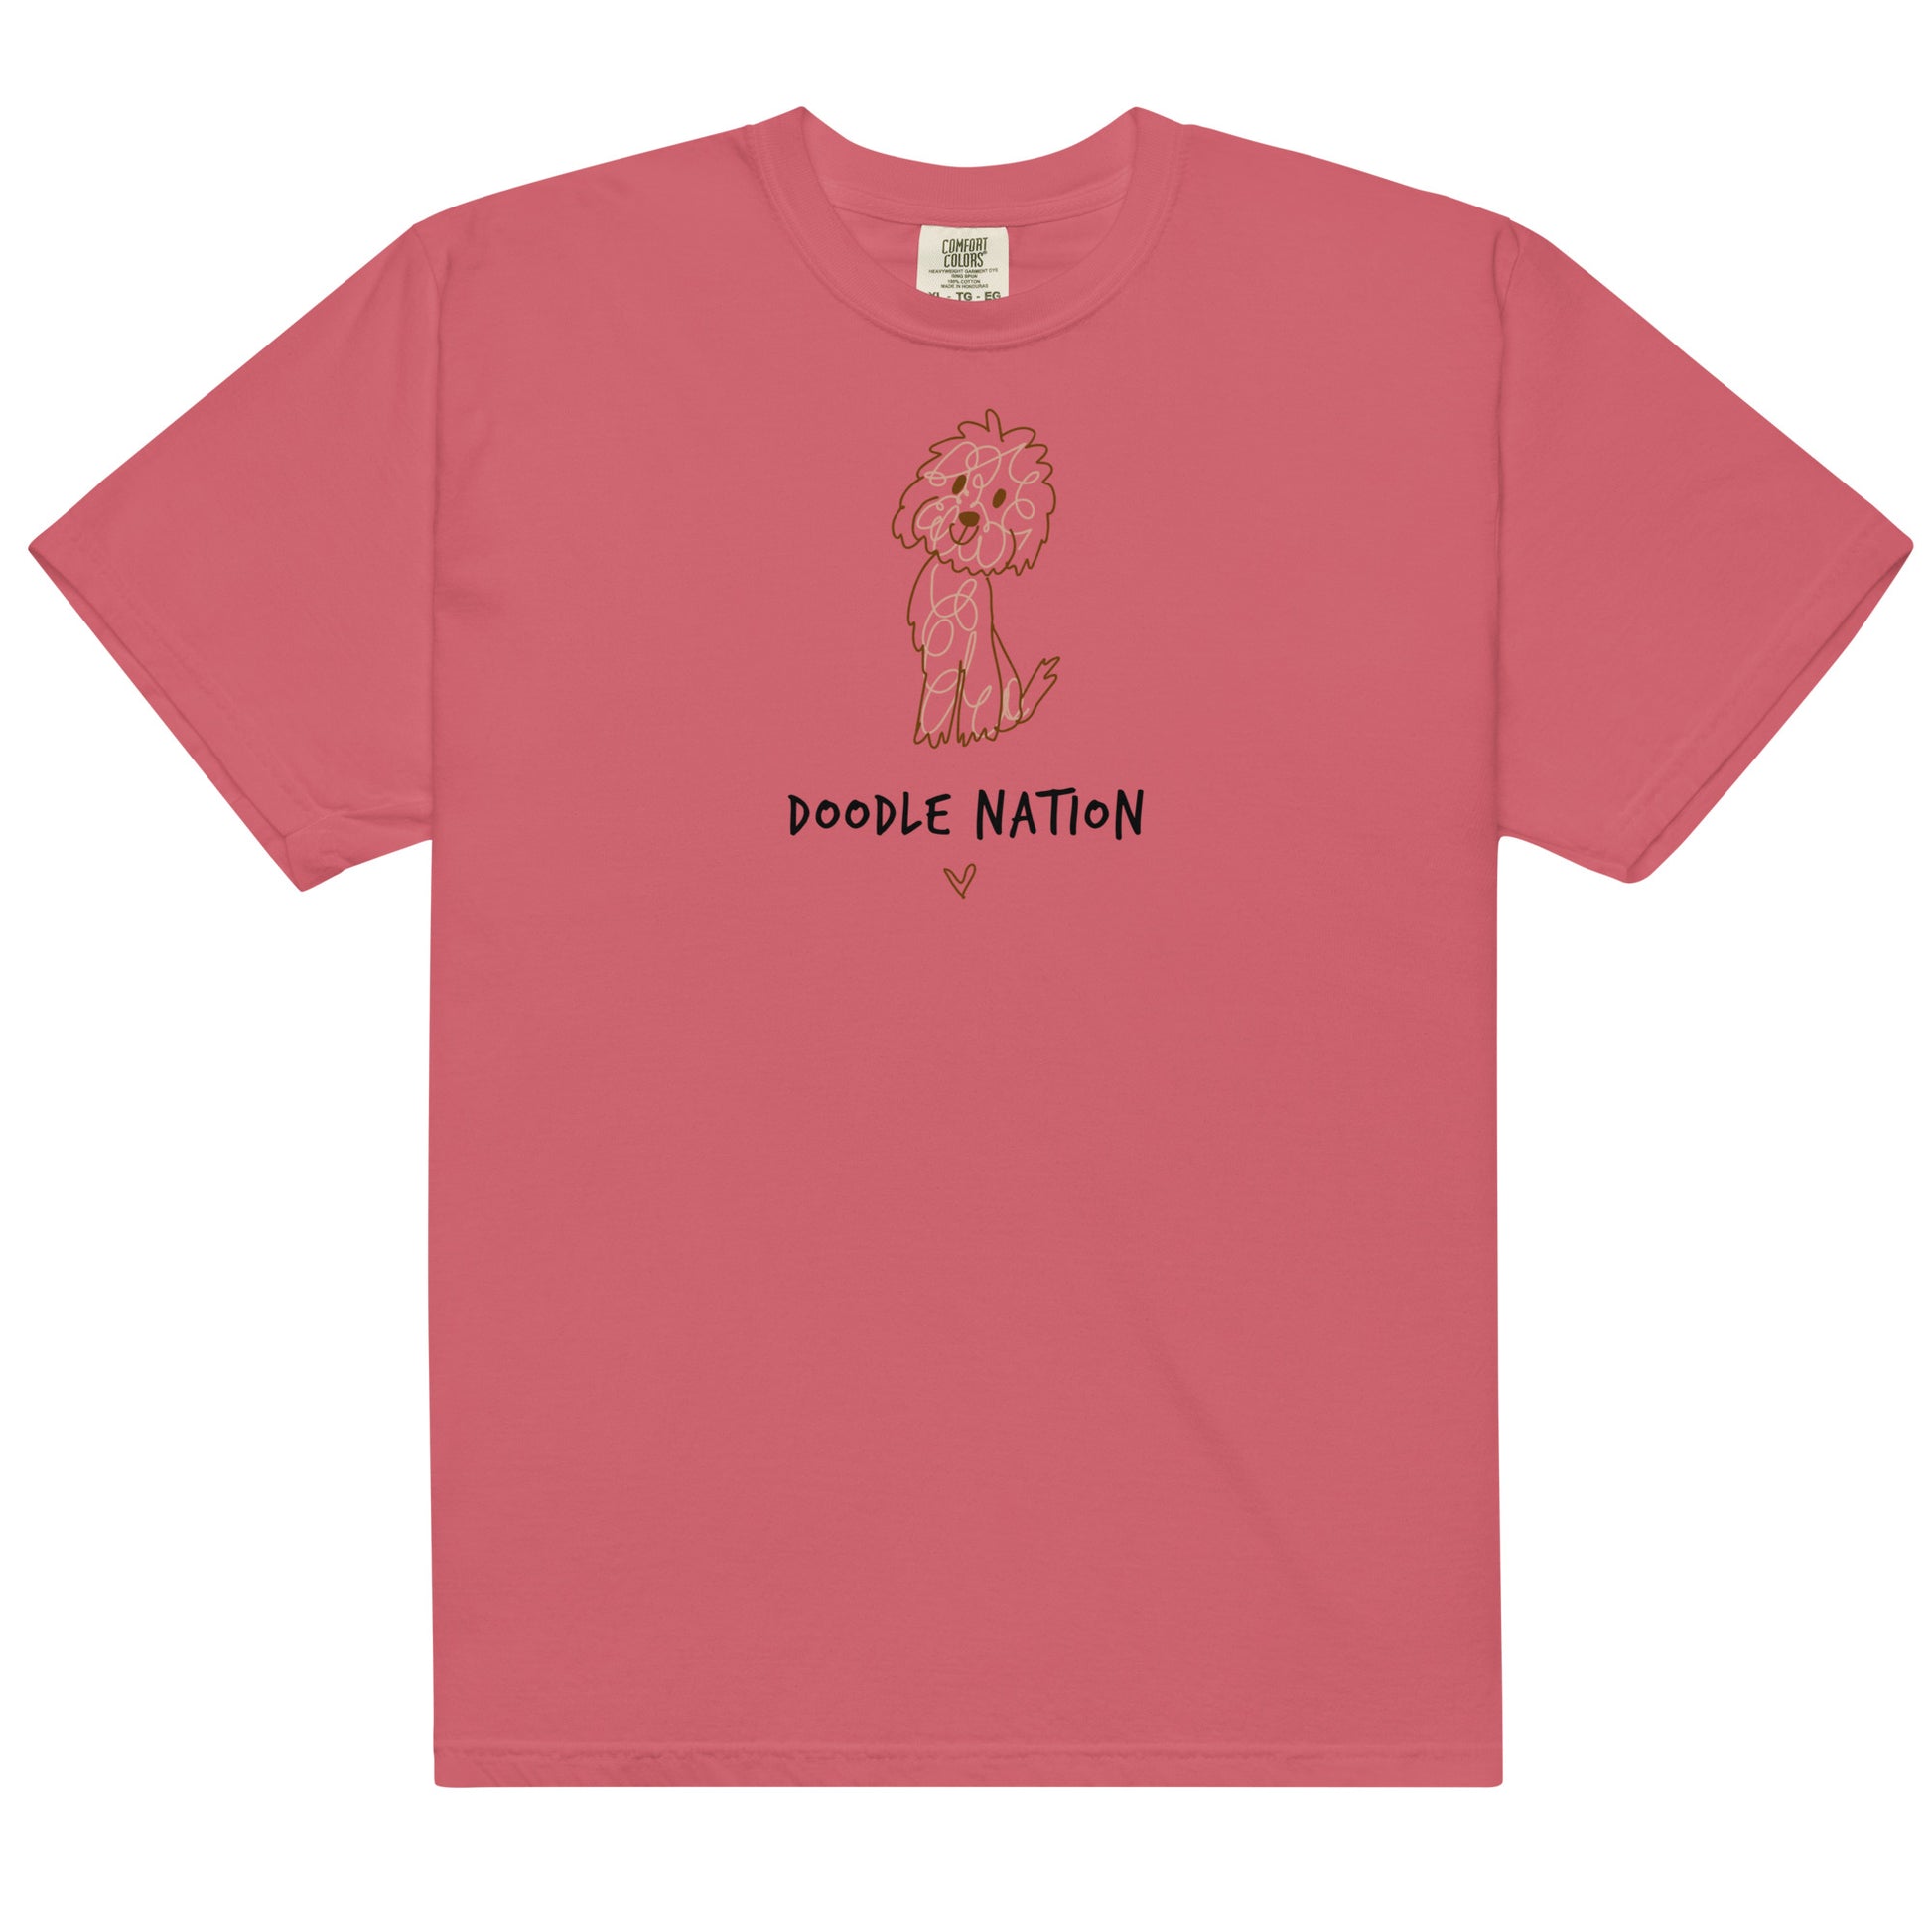 Watermelon comfort color t-shirt with hand drawn dog design and saying Doodle Nation